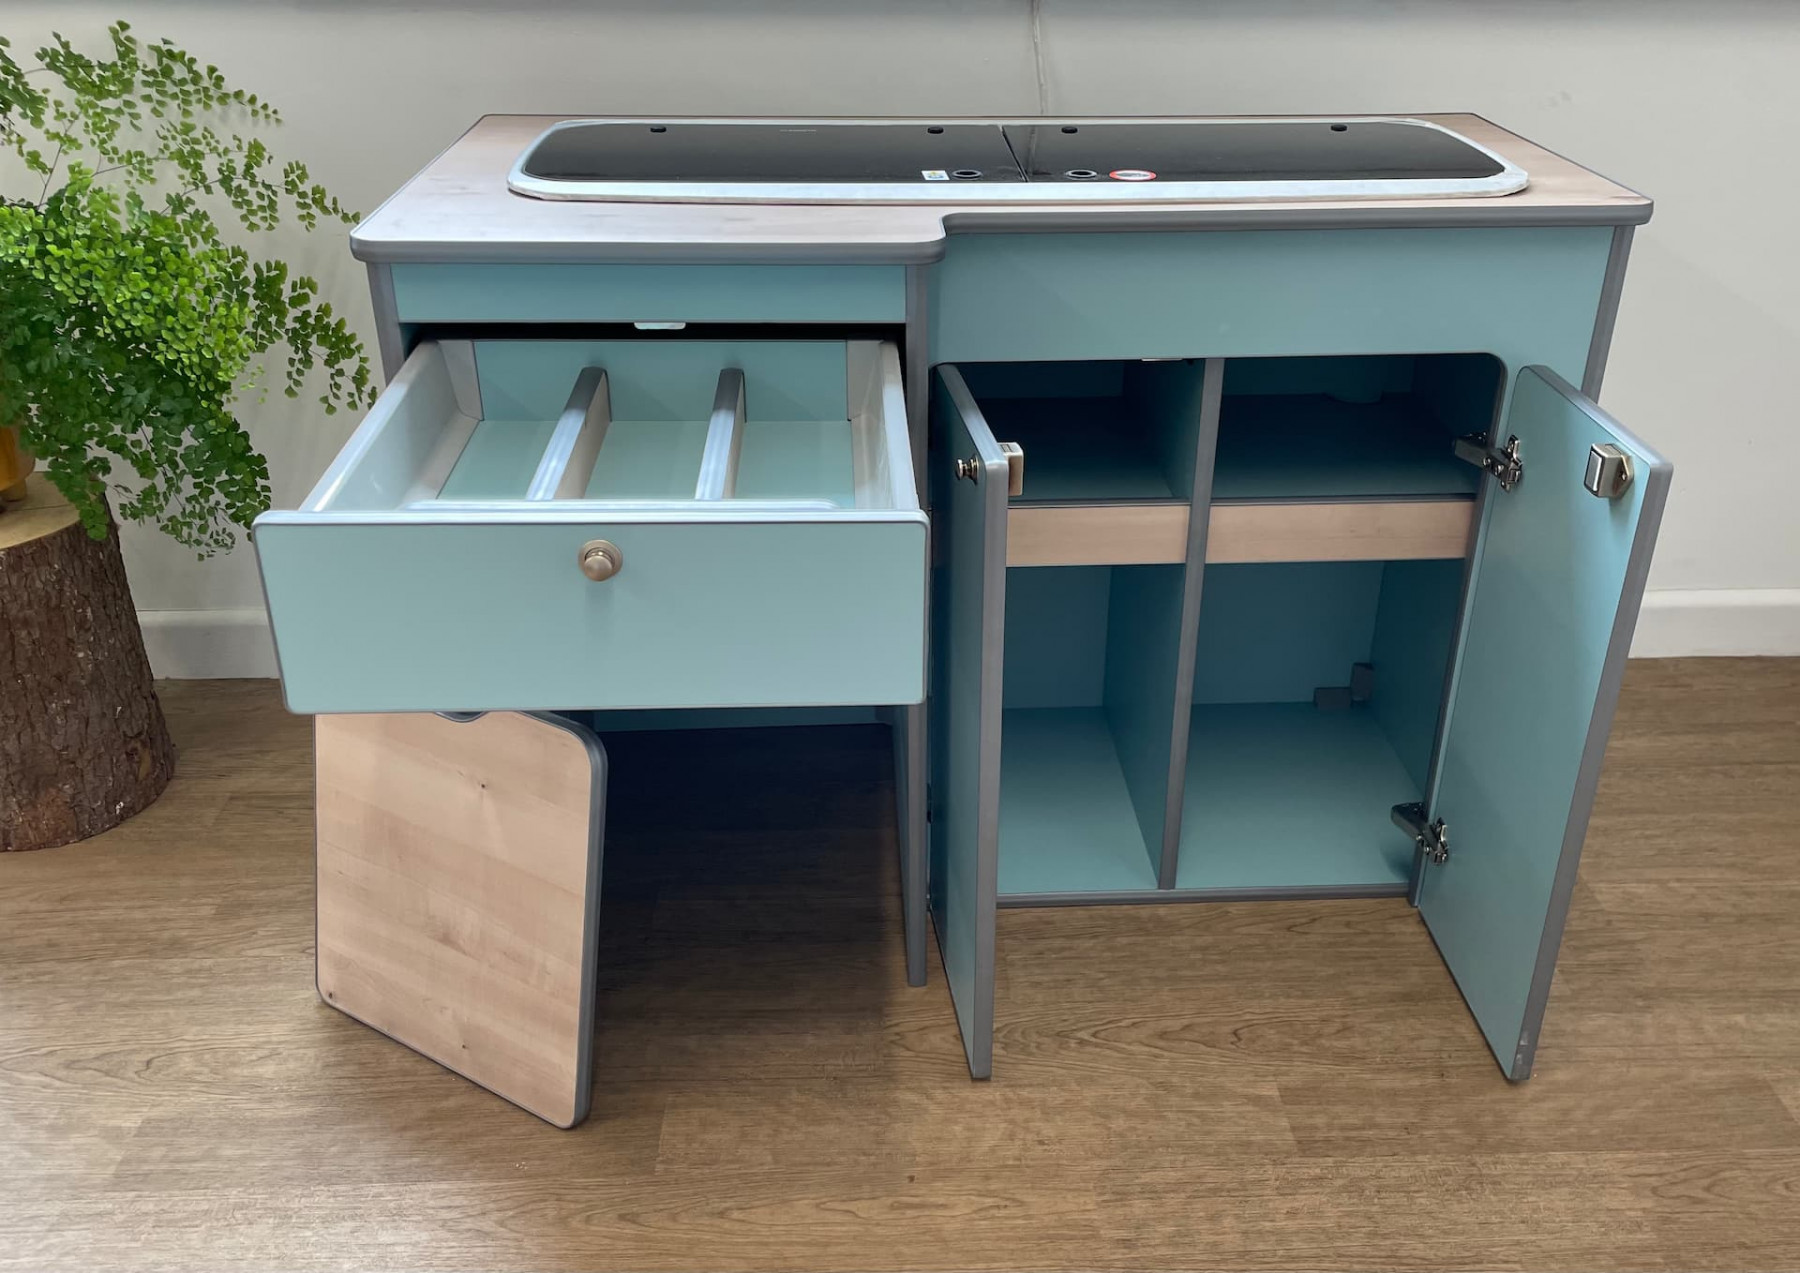 * The Aquamarine Blue unit with laminate worktop pictured is an additional £500 *